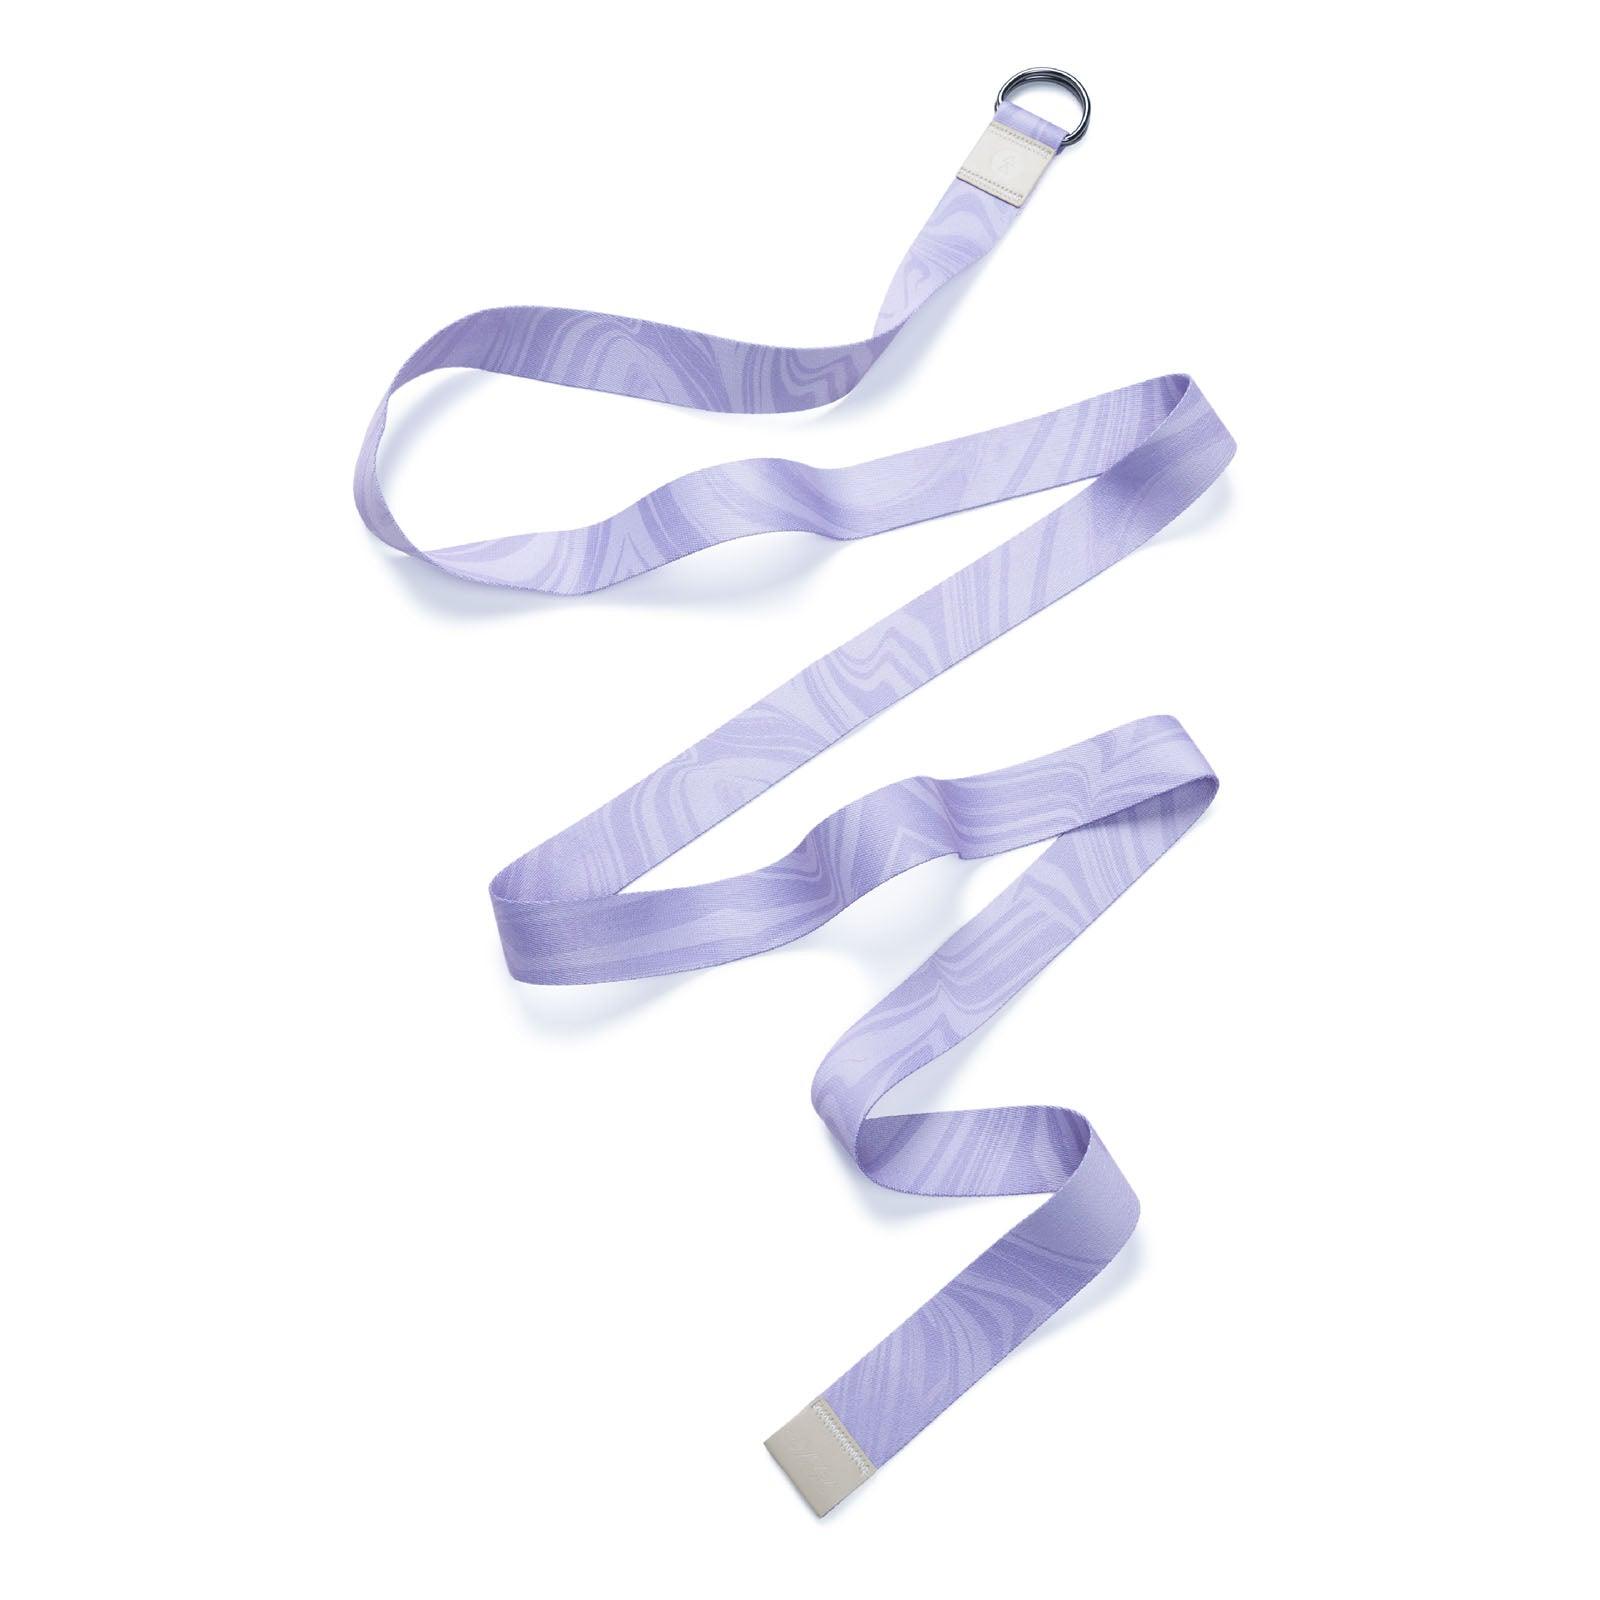 Yoga Strap - Lavender - Best For Stretching, Pilates, Physical Therapy - Yoga Design Lab 